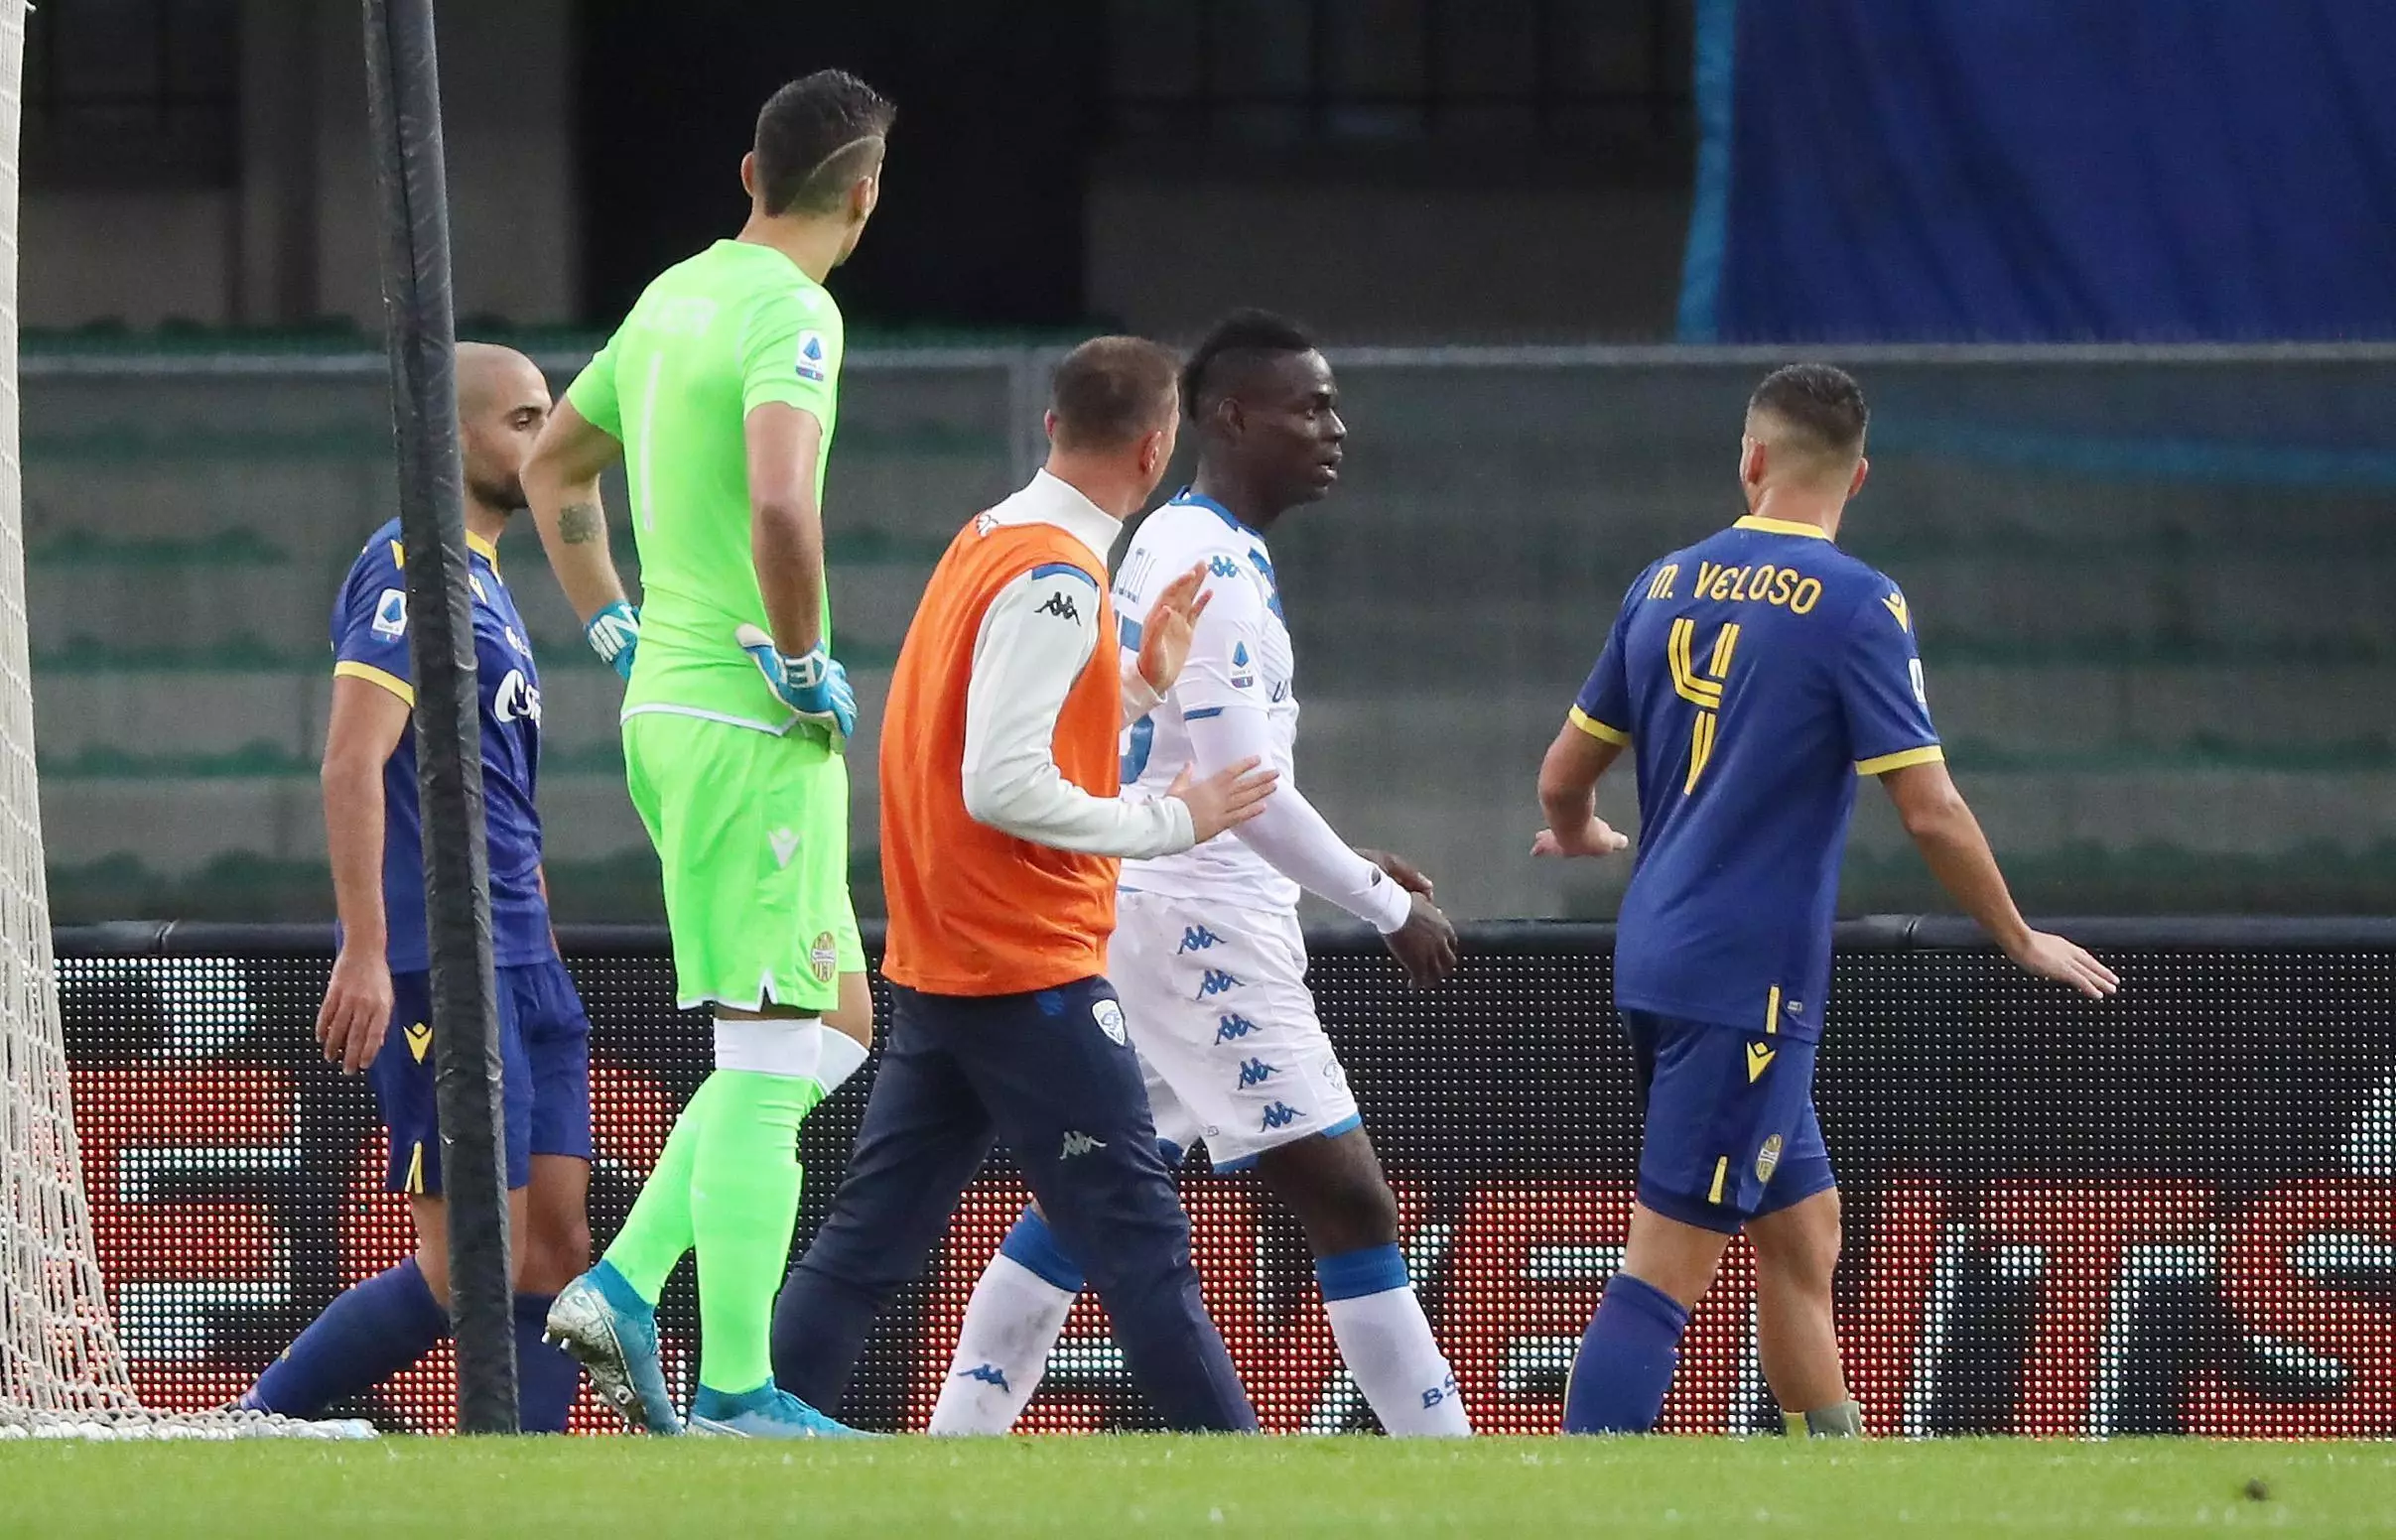 Balotelli reacts to racist abuse from Verona fans. Image: PA Images